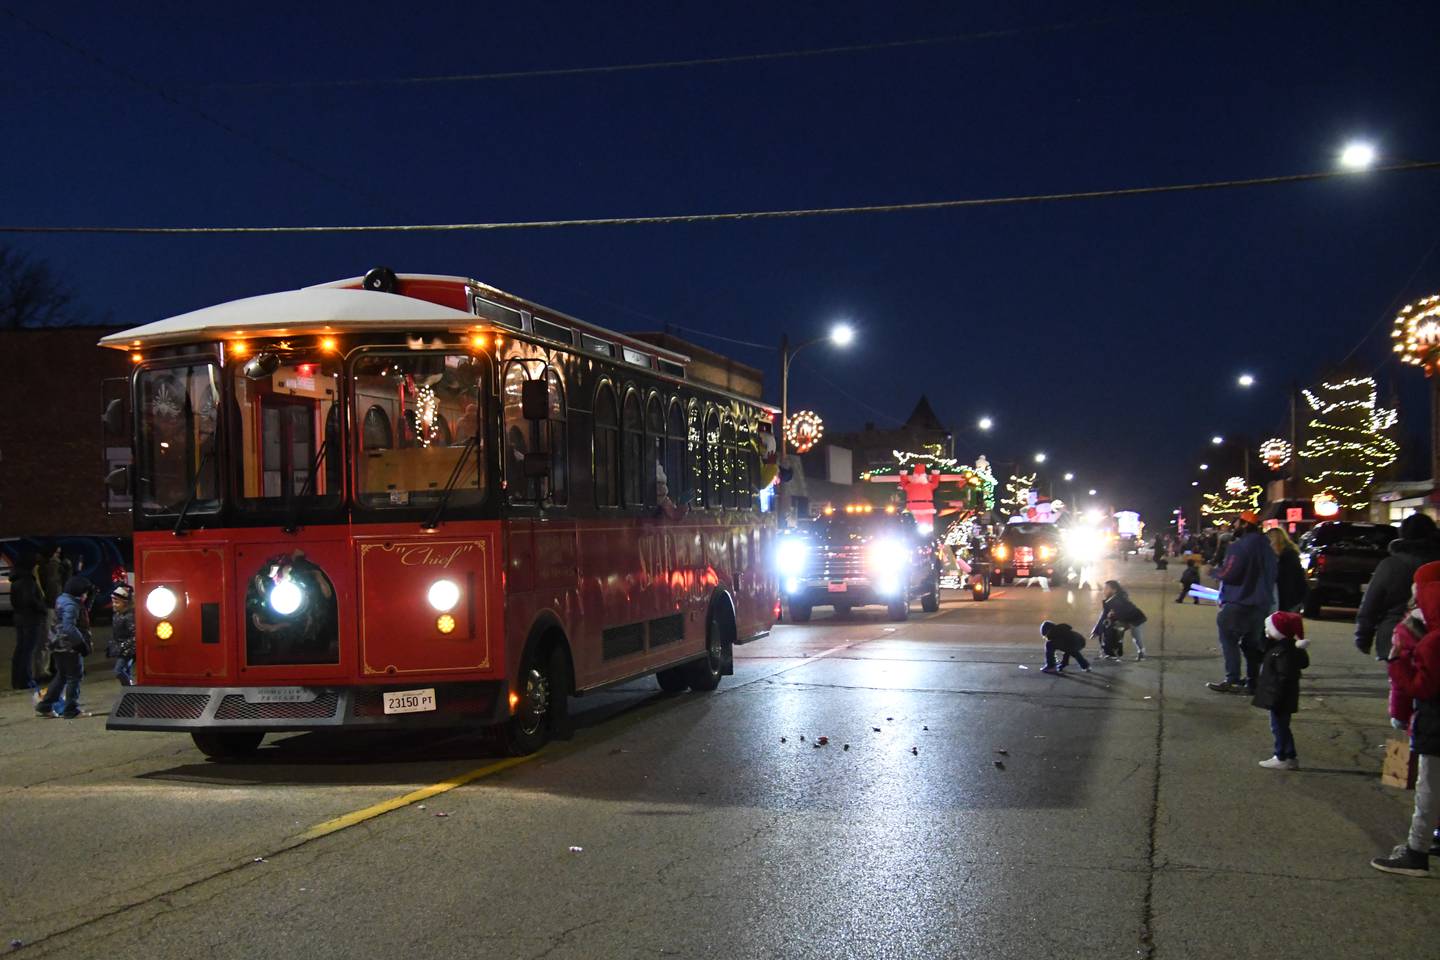 Ladd's Lighted Christmas Parade on Saturday, December 11.